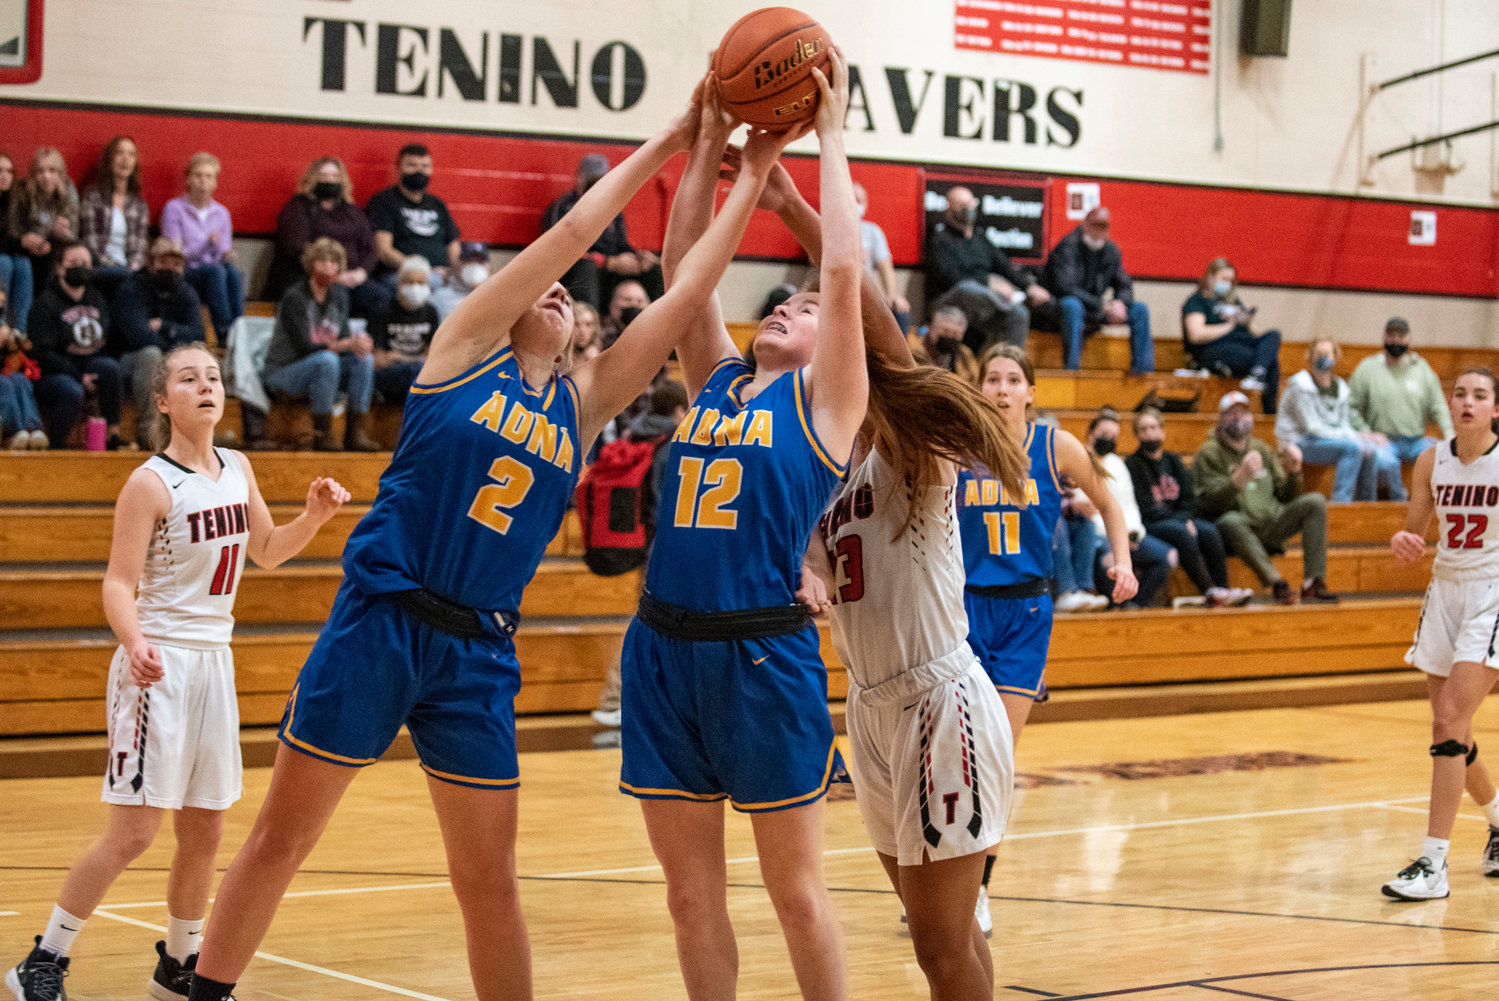 Adna's Summer White (2) and Natalie Loose (12) go for a defensive rebound against Tenino on Dec. 14.